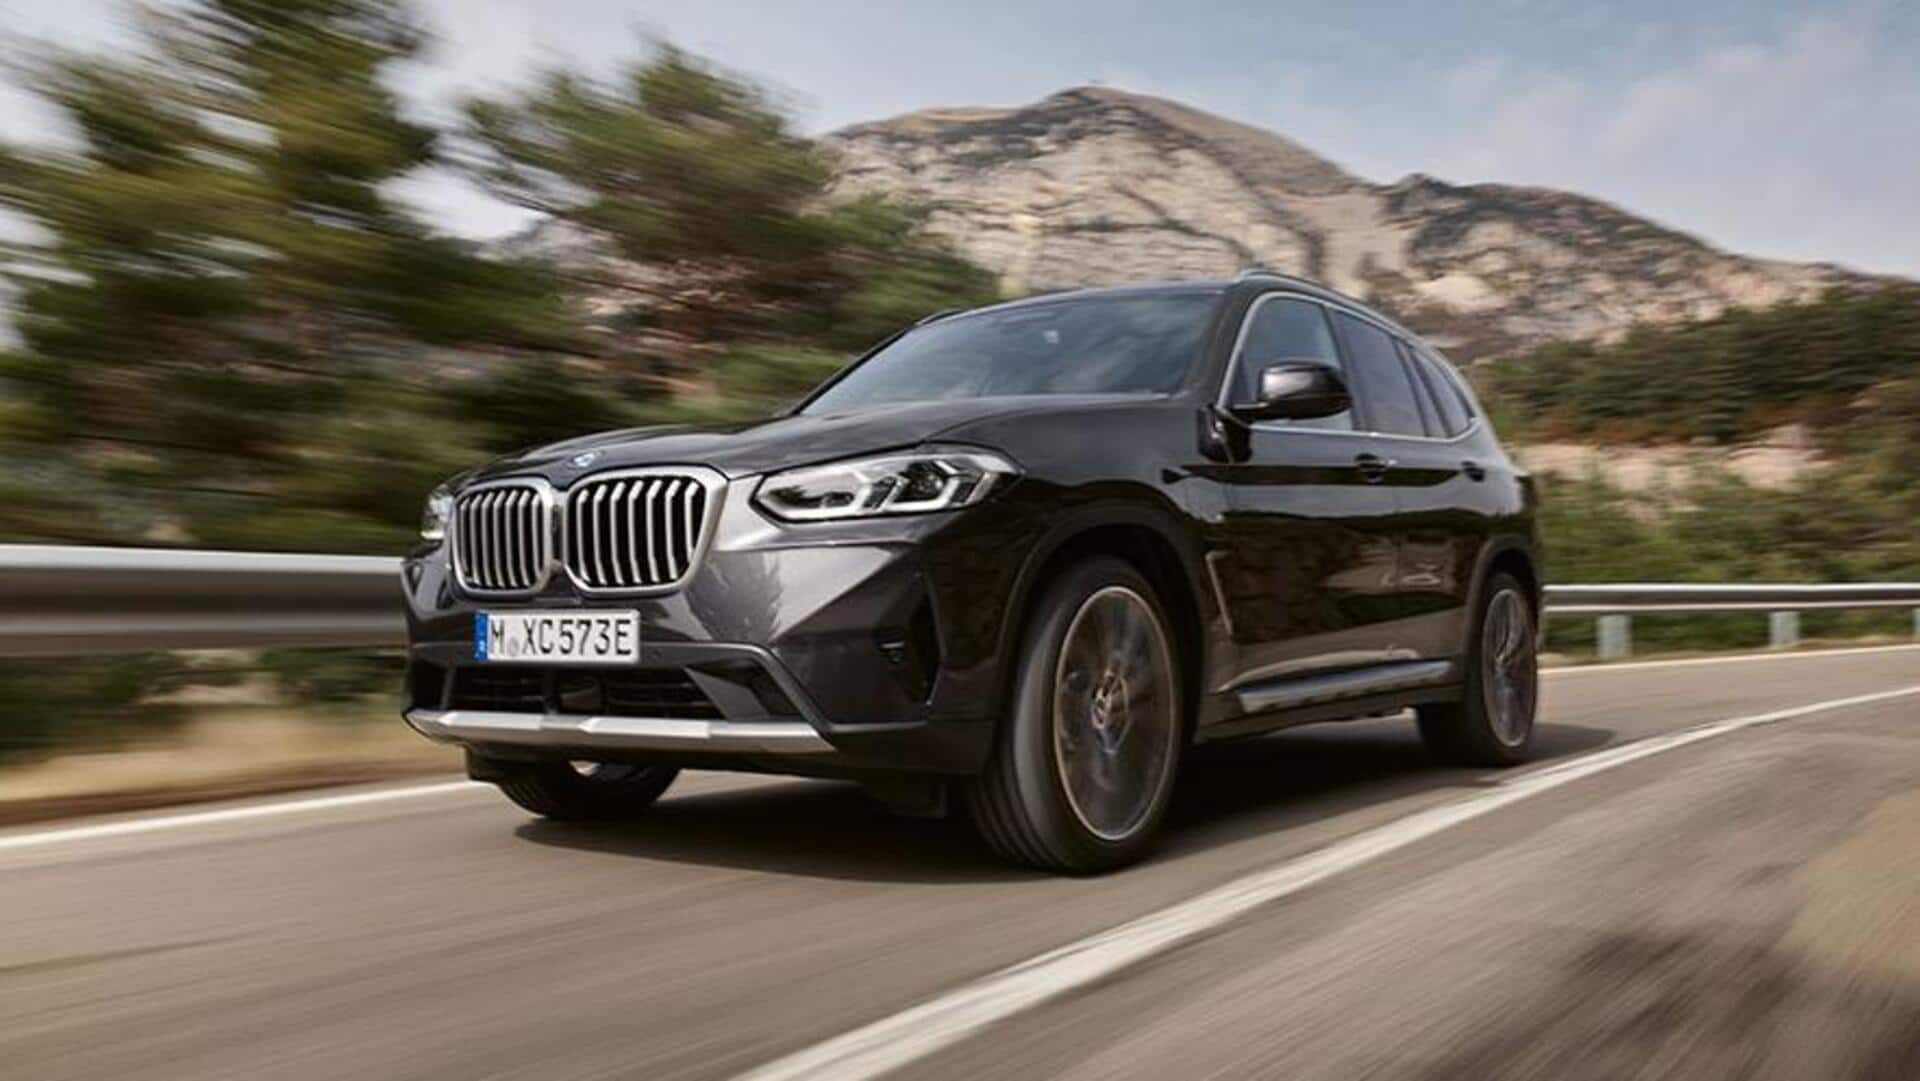 2025 BMW X3 SUV in the works: What to expect